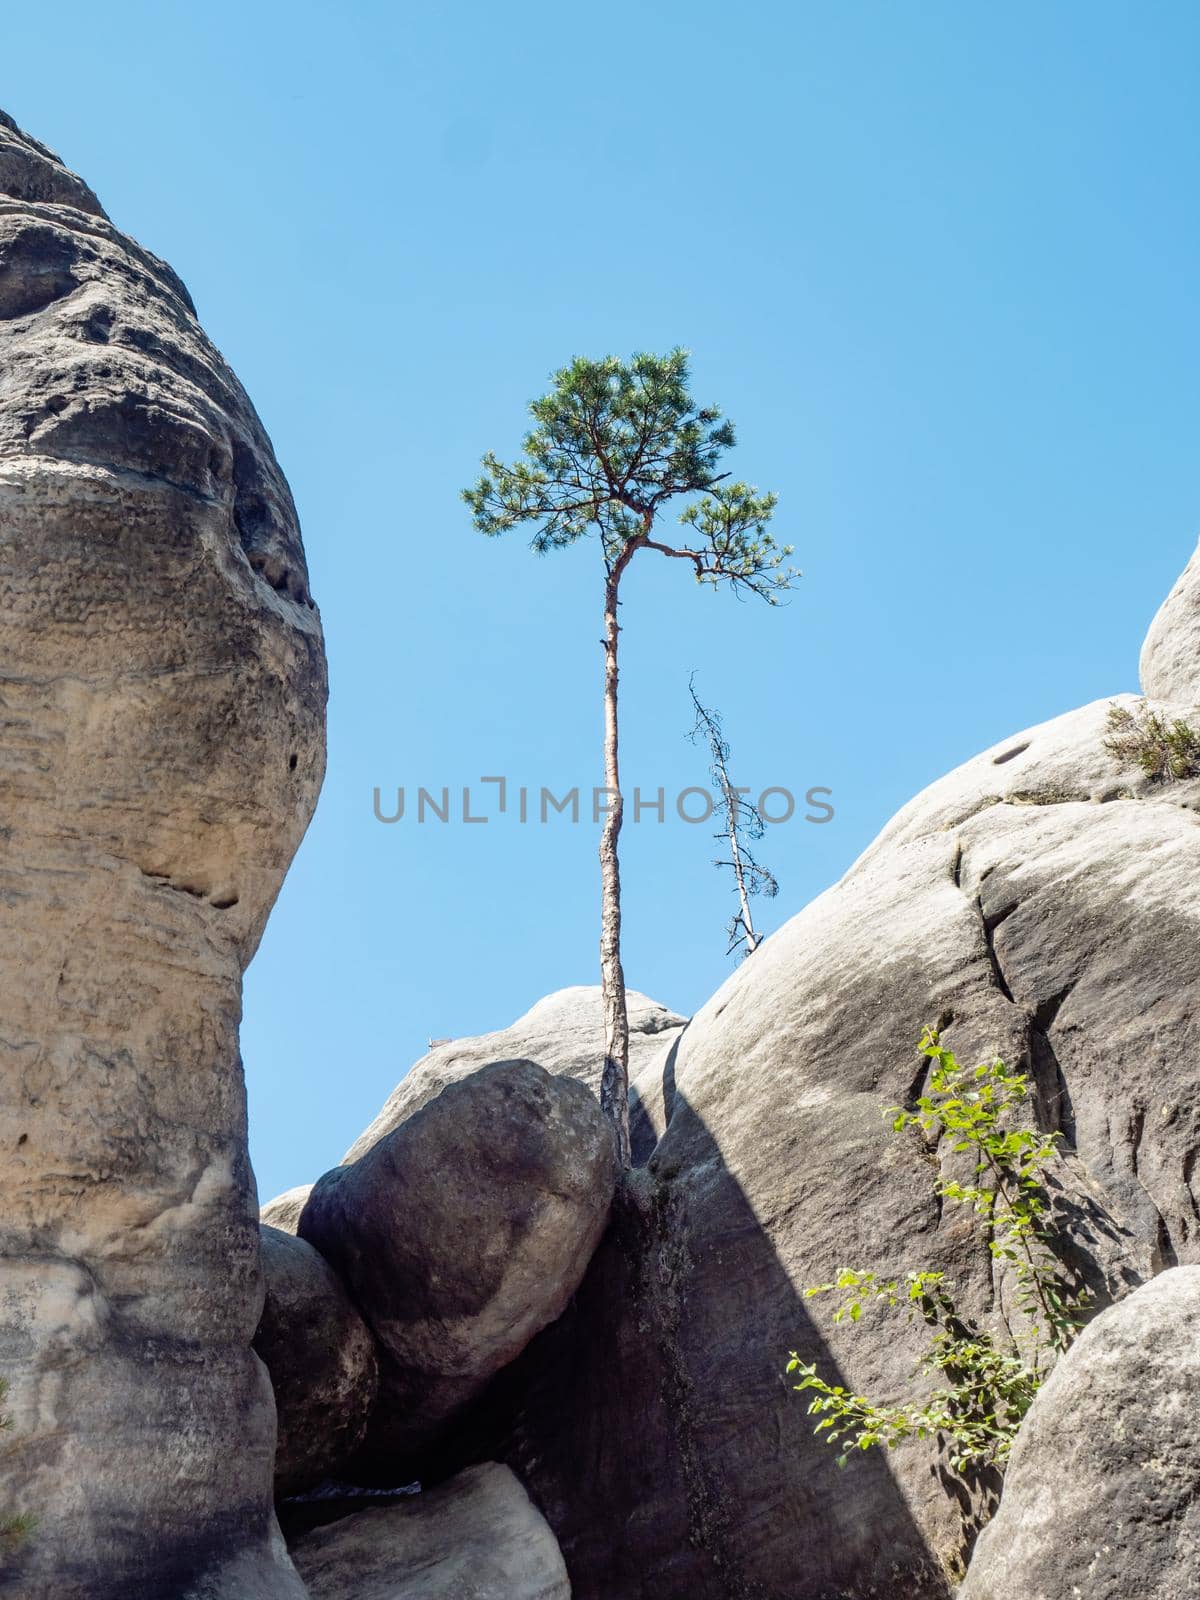 Wild bonsai of pine on sandstone rocks, blue sky without in the background.